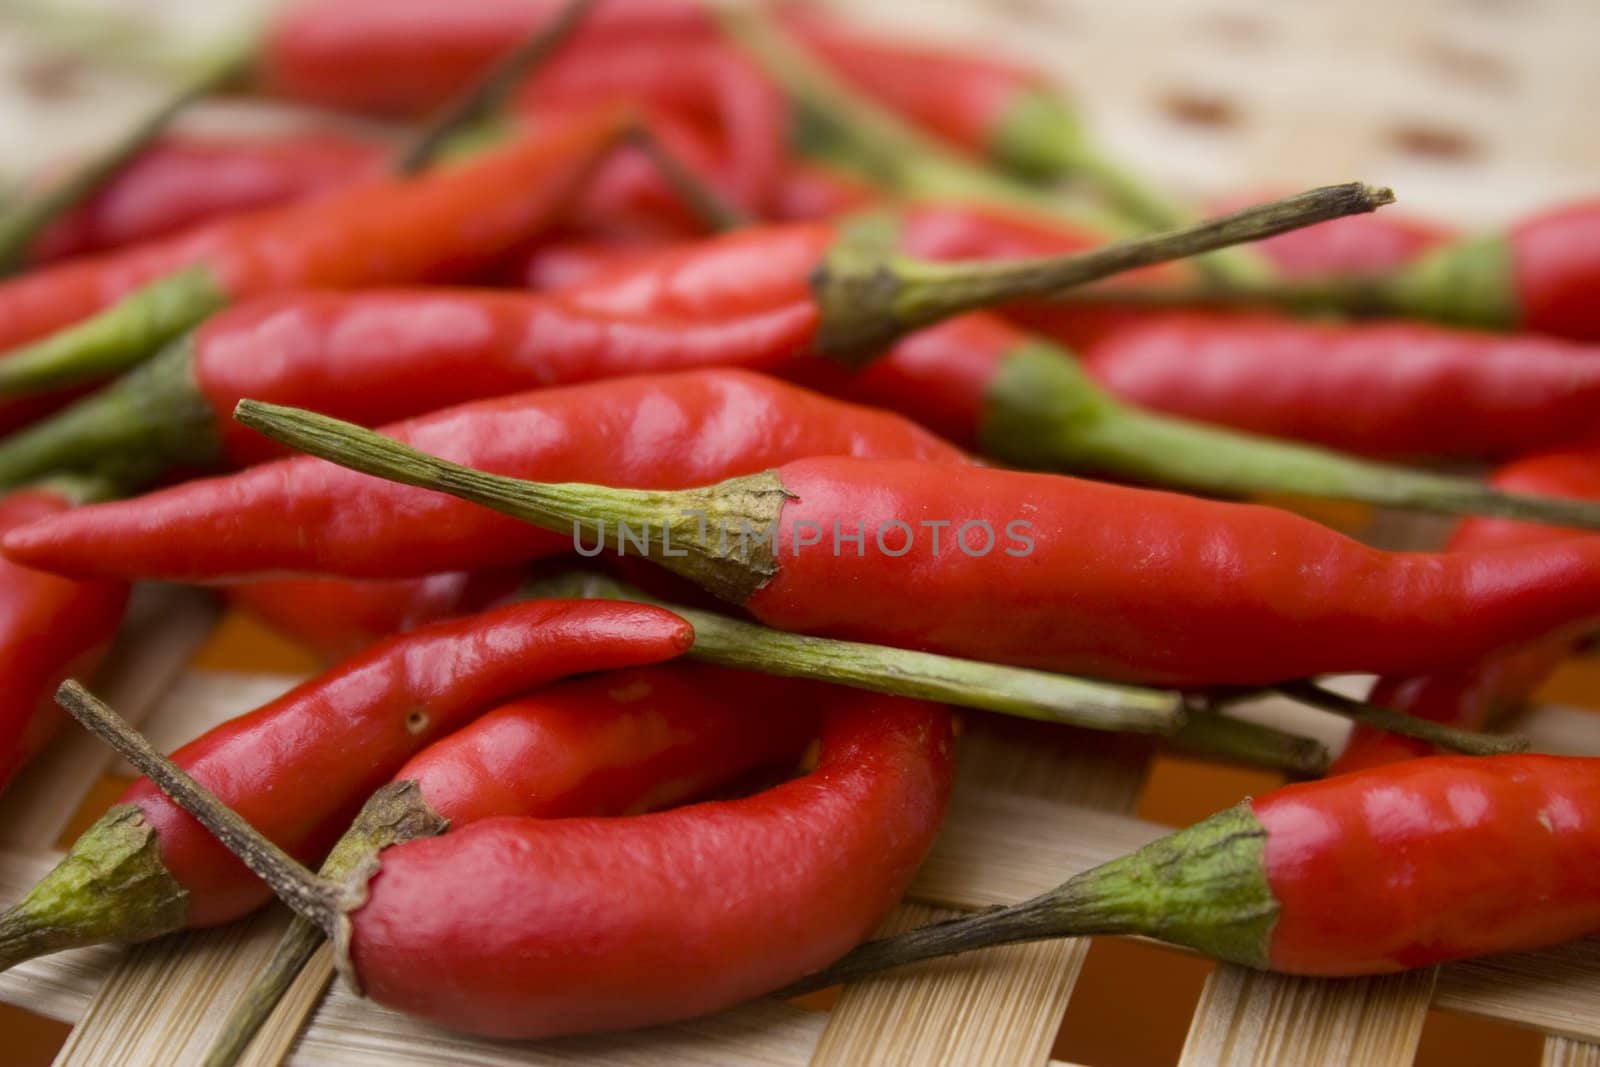 A pile of small red chili peppers on woven basket